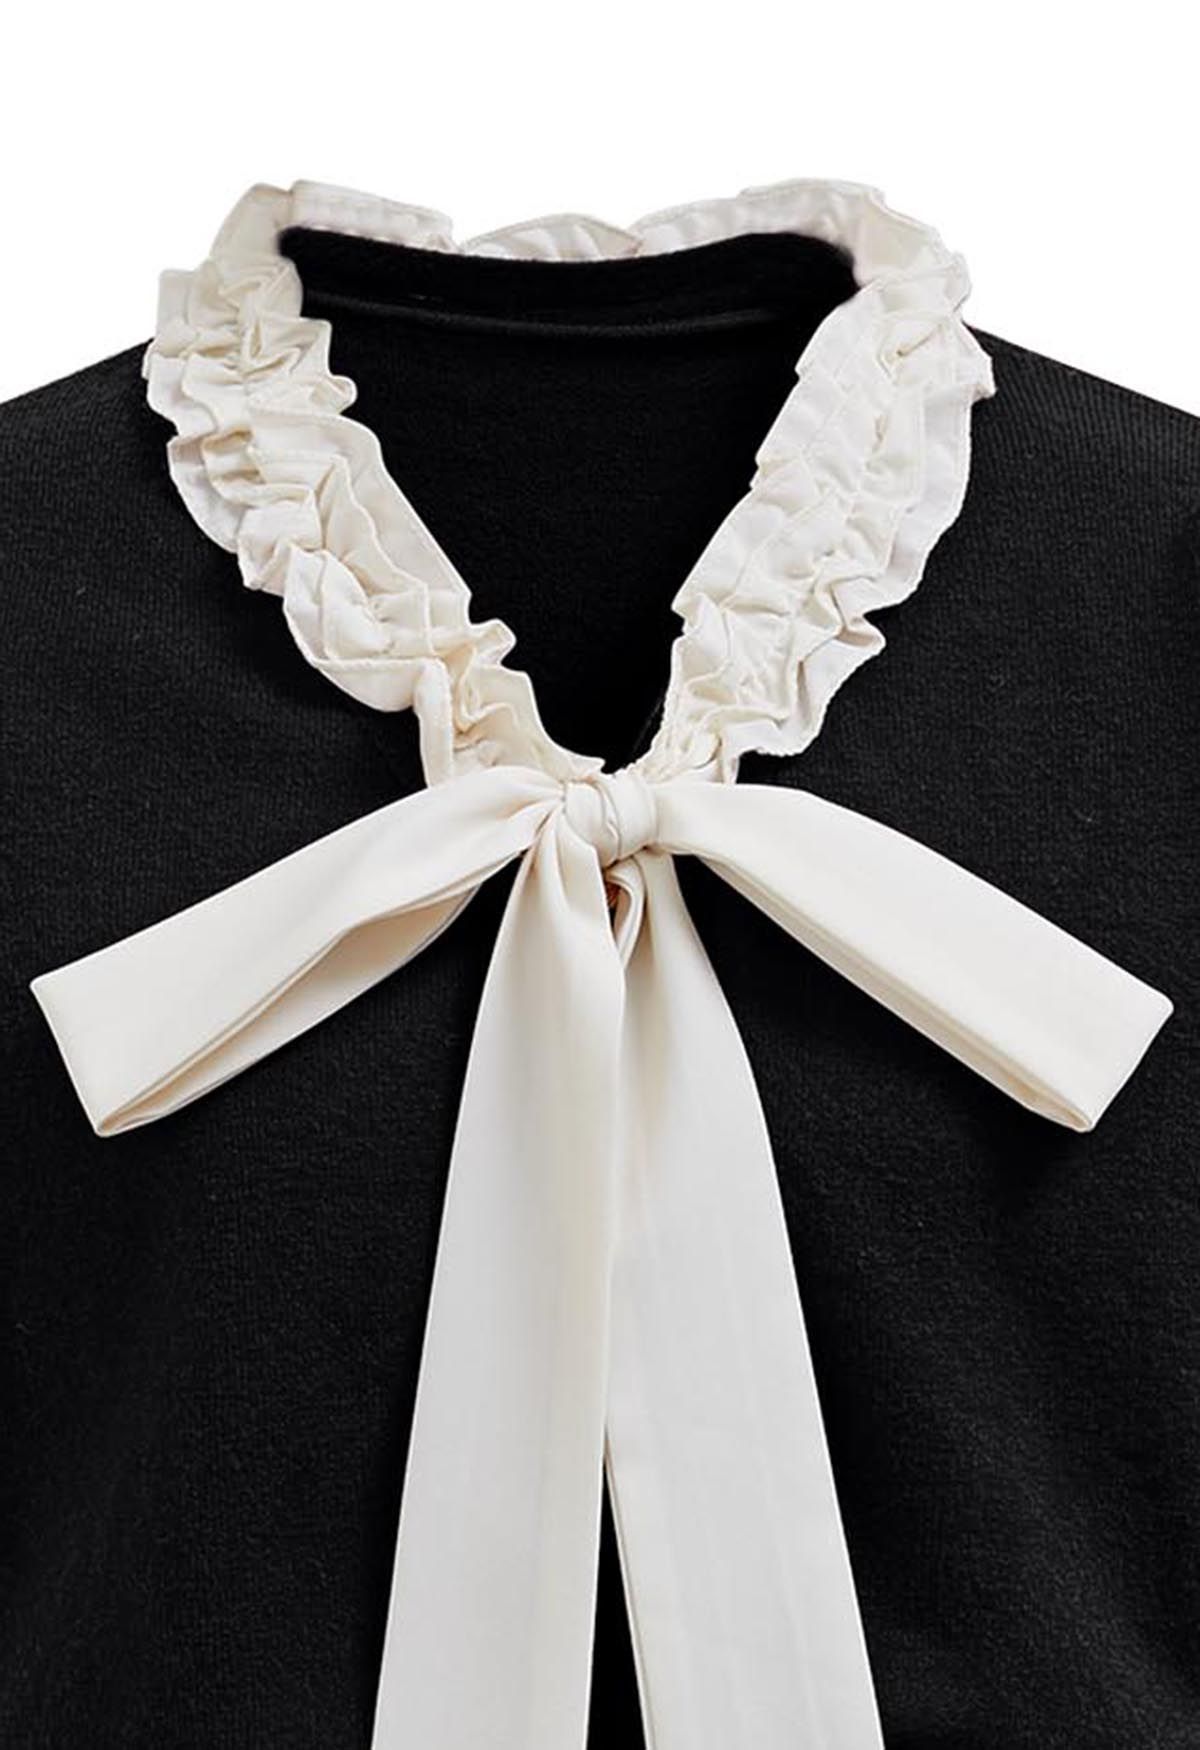 Ruffle Tie-Bow Wool-Blend Buttoned Top in Black